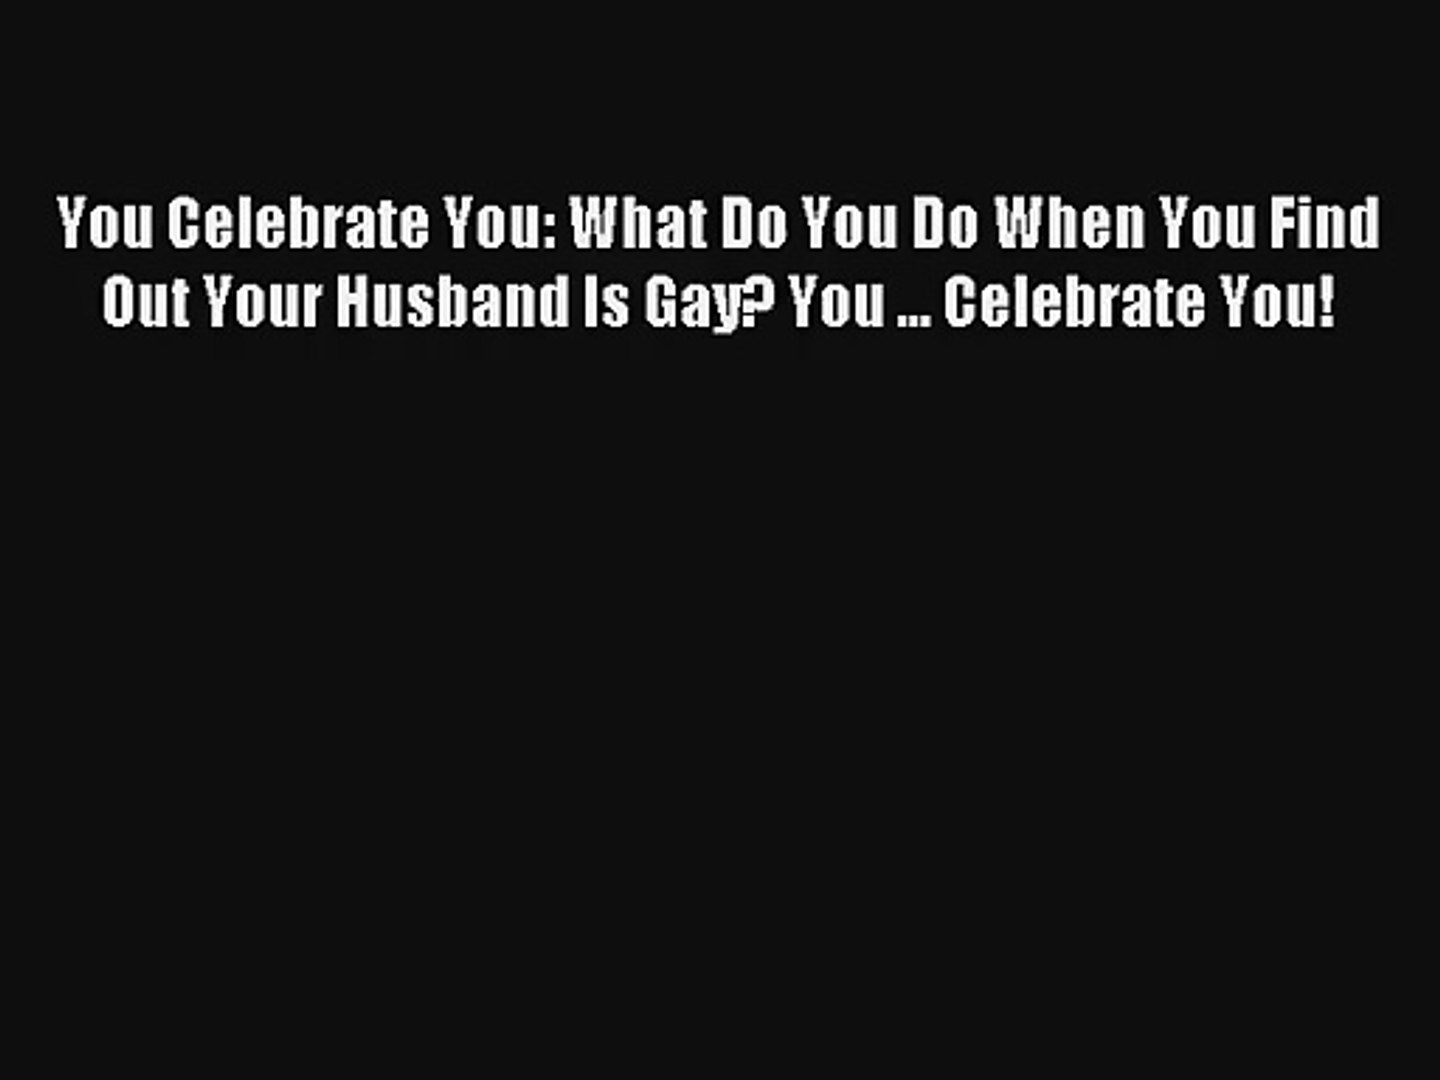 Read You Celebrate You: What Do You Do When You Find Out Your Husband Is Gay? You ... Celebrate